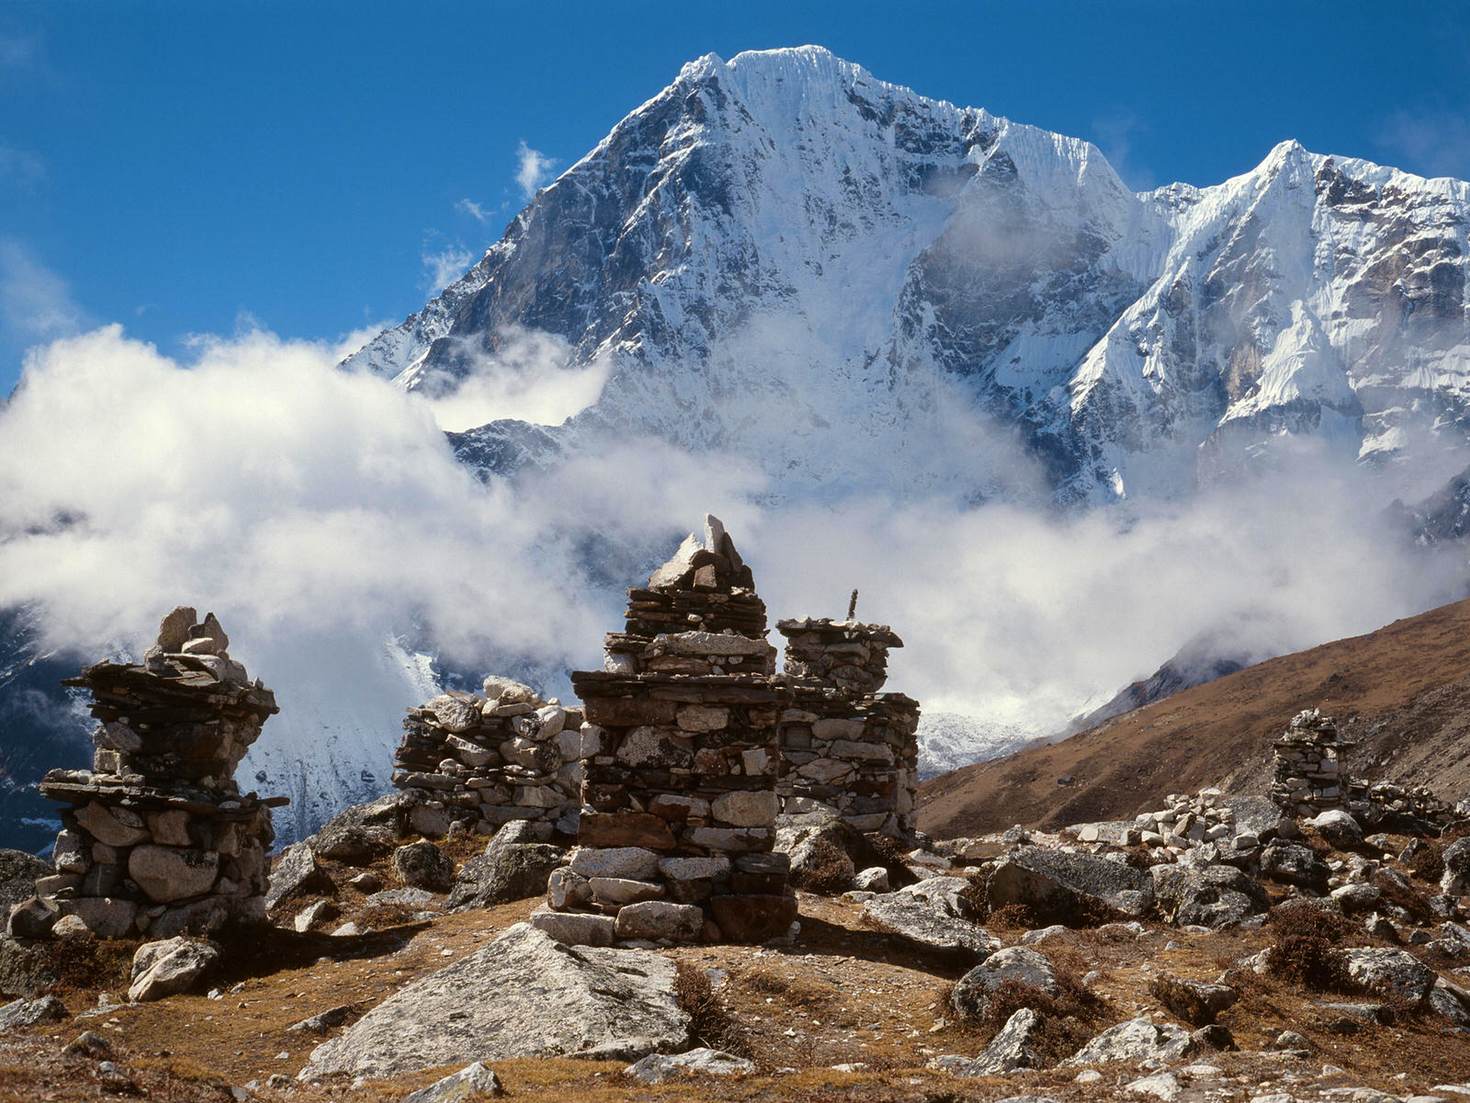 Memorials for climbers lost on Everest Â© Image by Andrzej Stajer / Getty Images